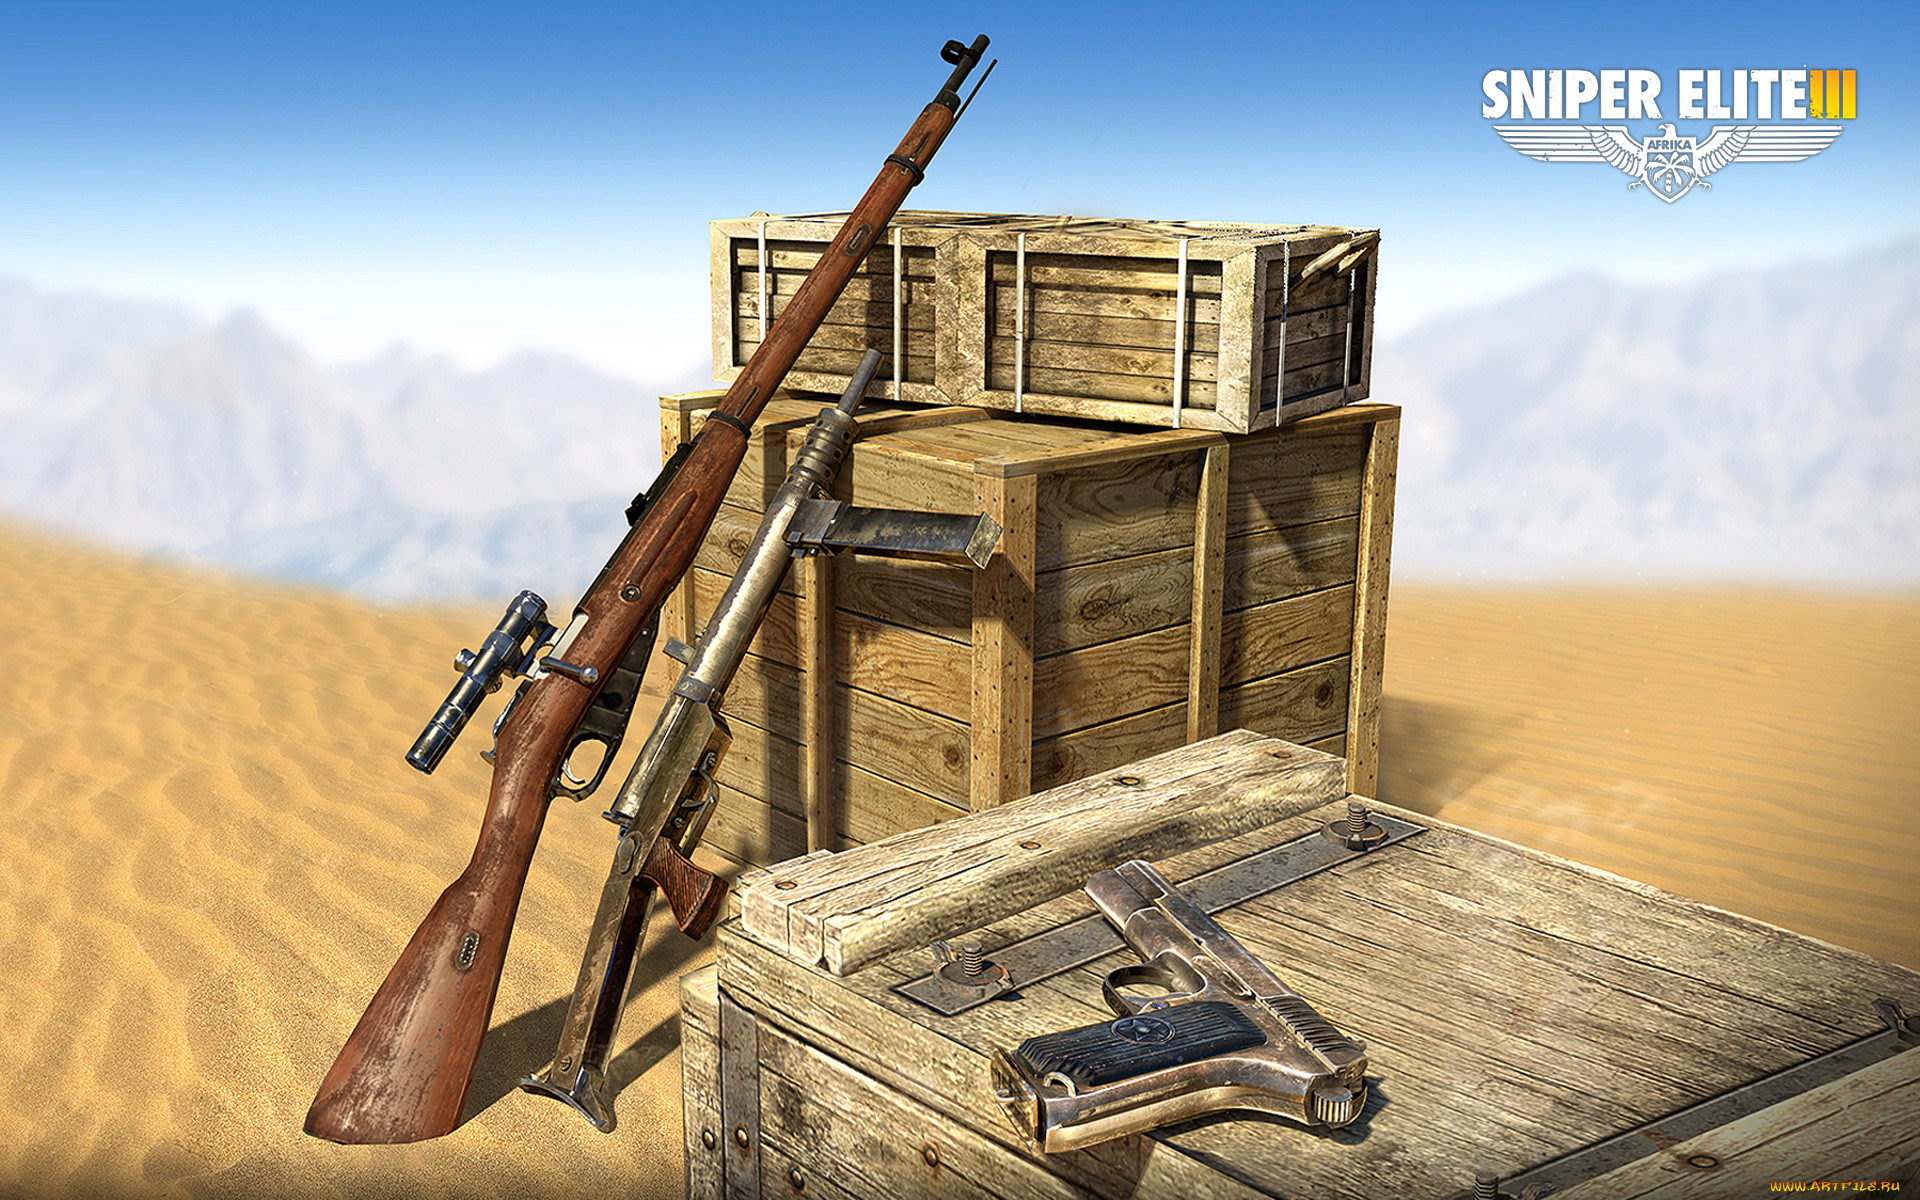  , sniper elite iii,  afrika, sniper, elite, iii, afrika, action, , 